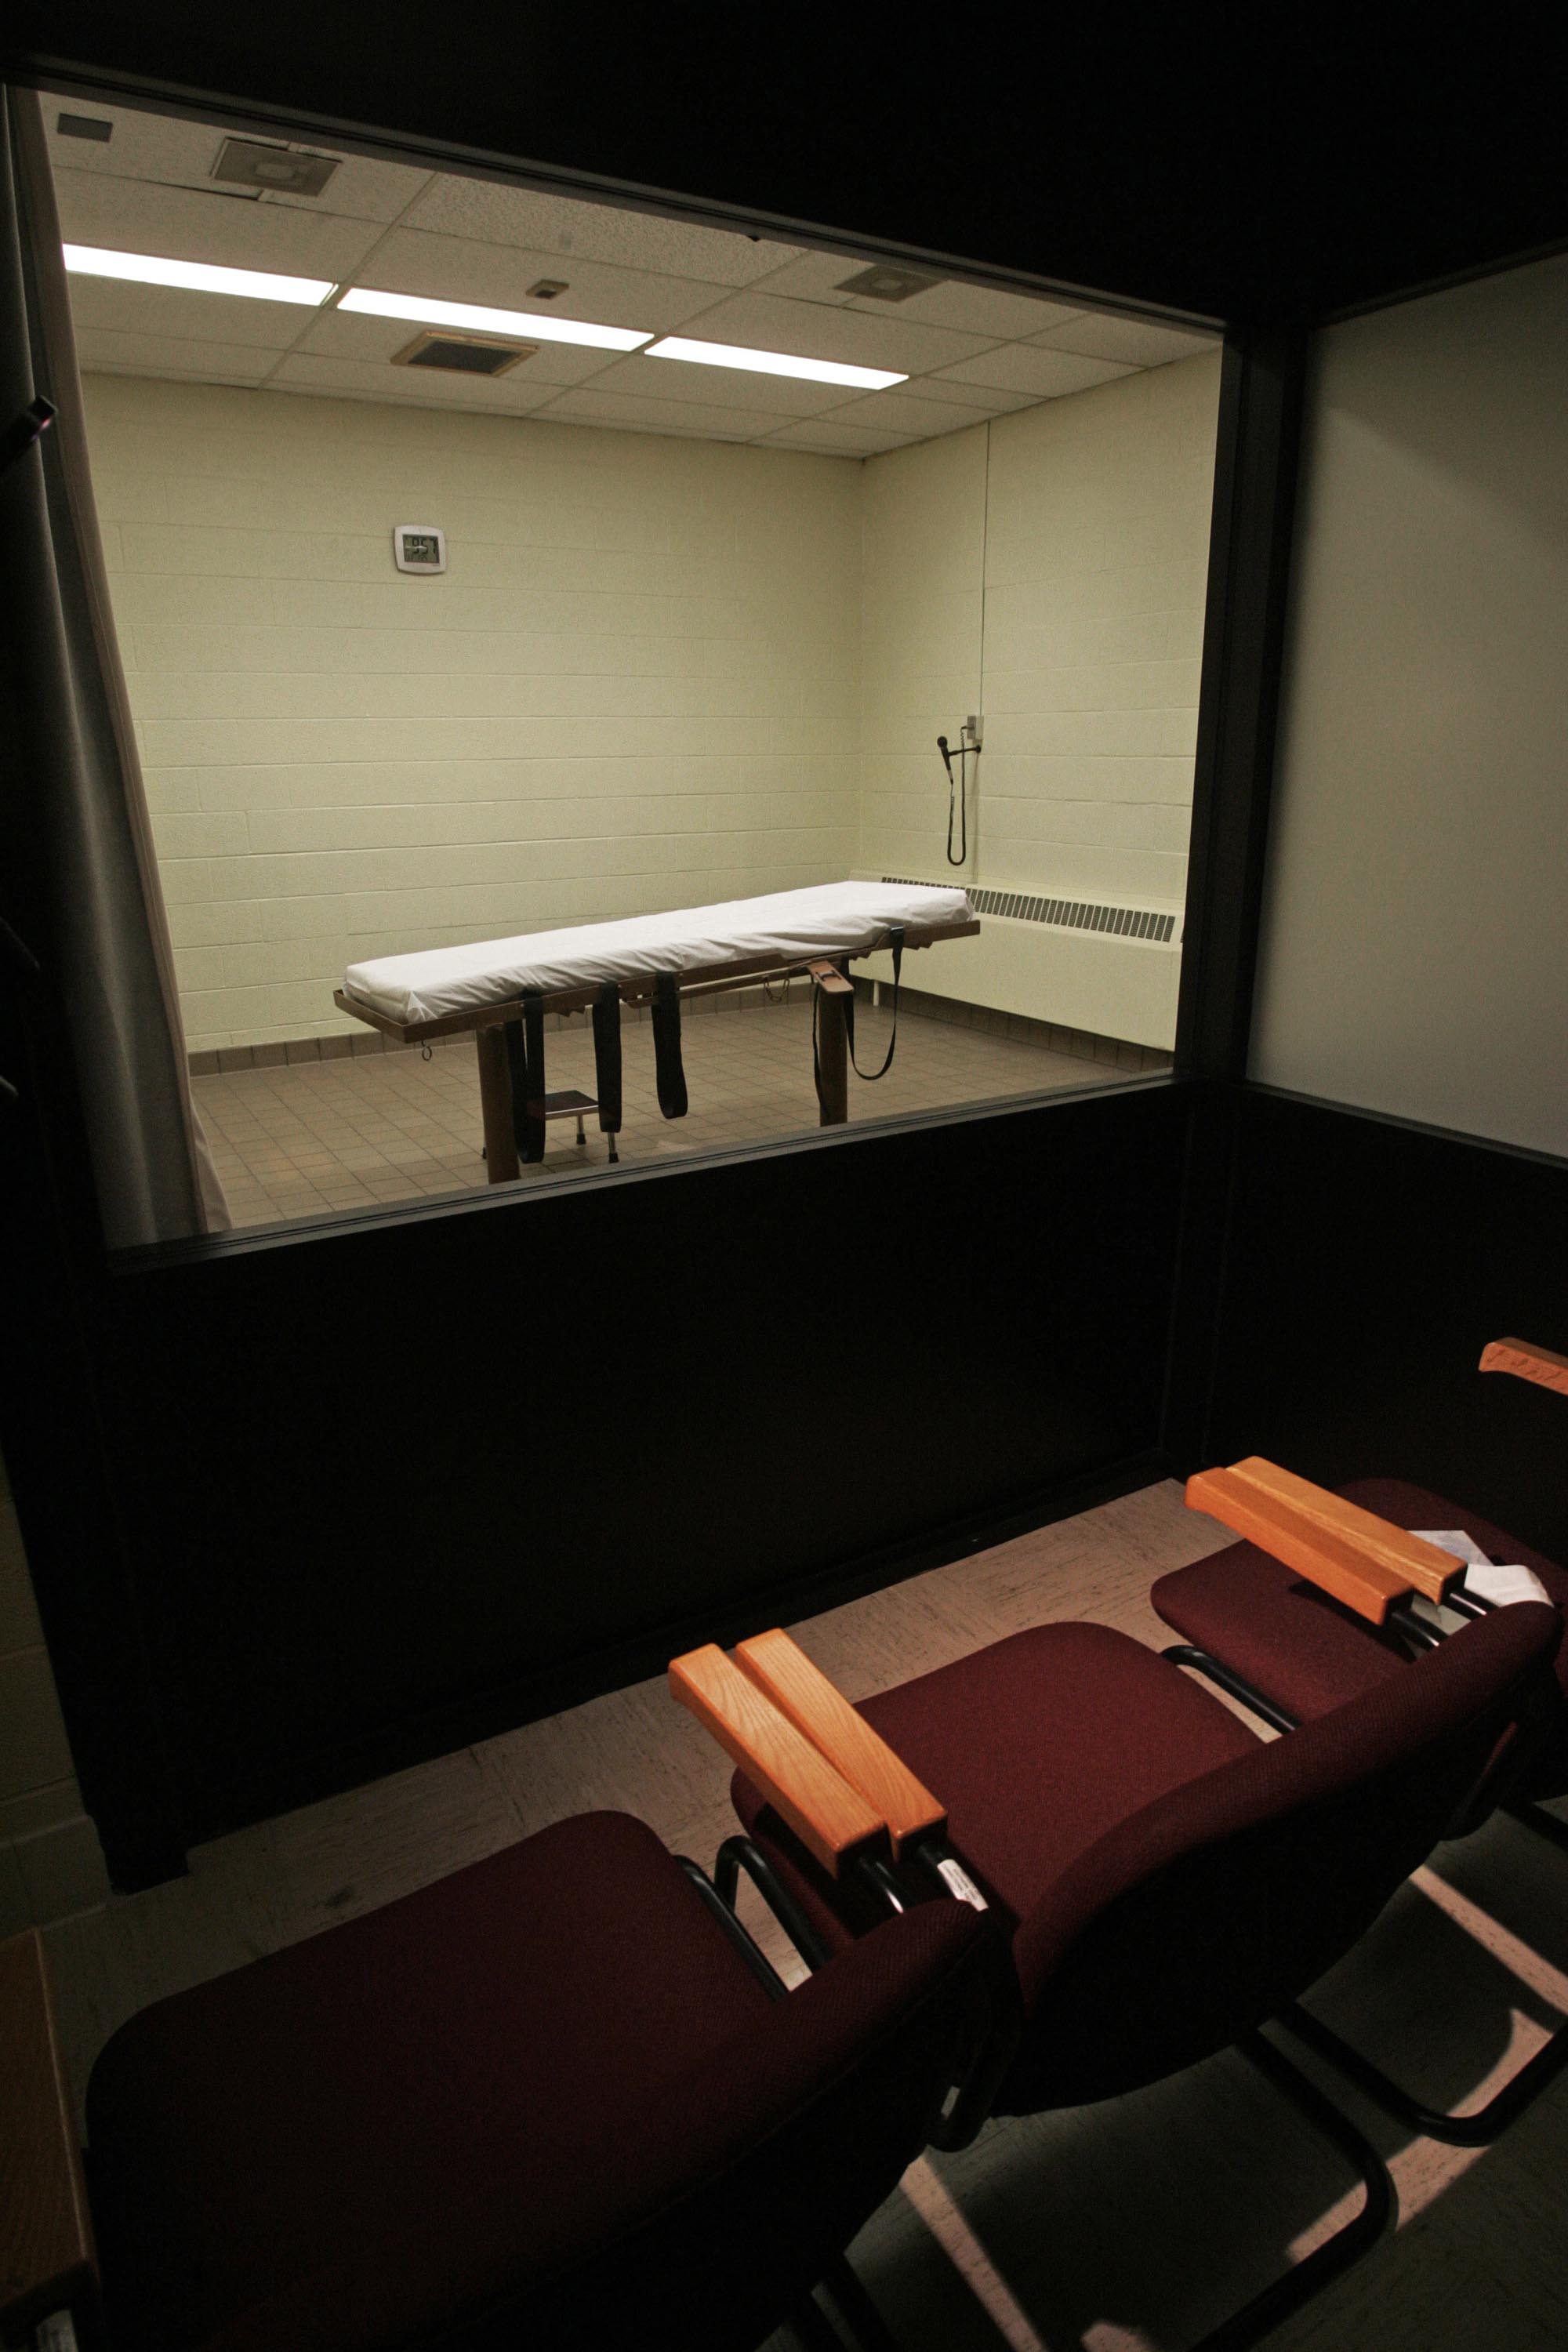 Final moments The viewing room at the Southern Ohio Correctional Facility looks onto the chamber where McGuire was executed 